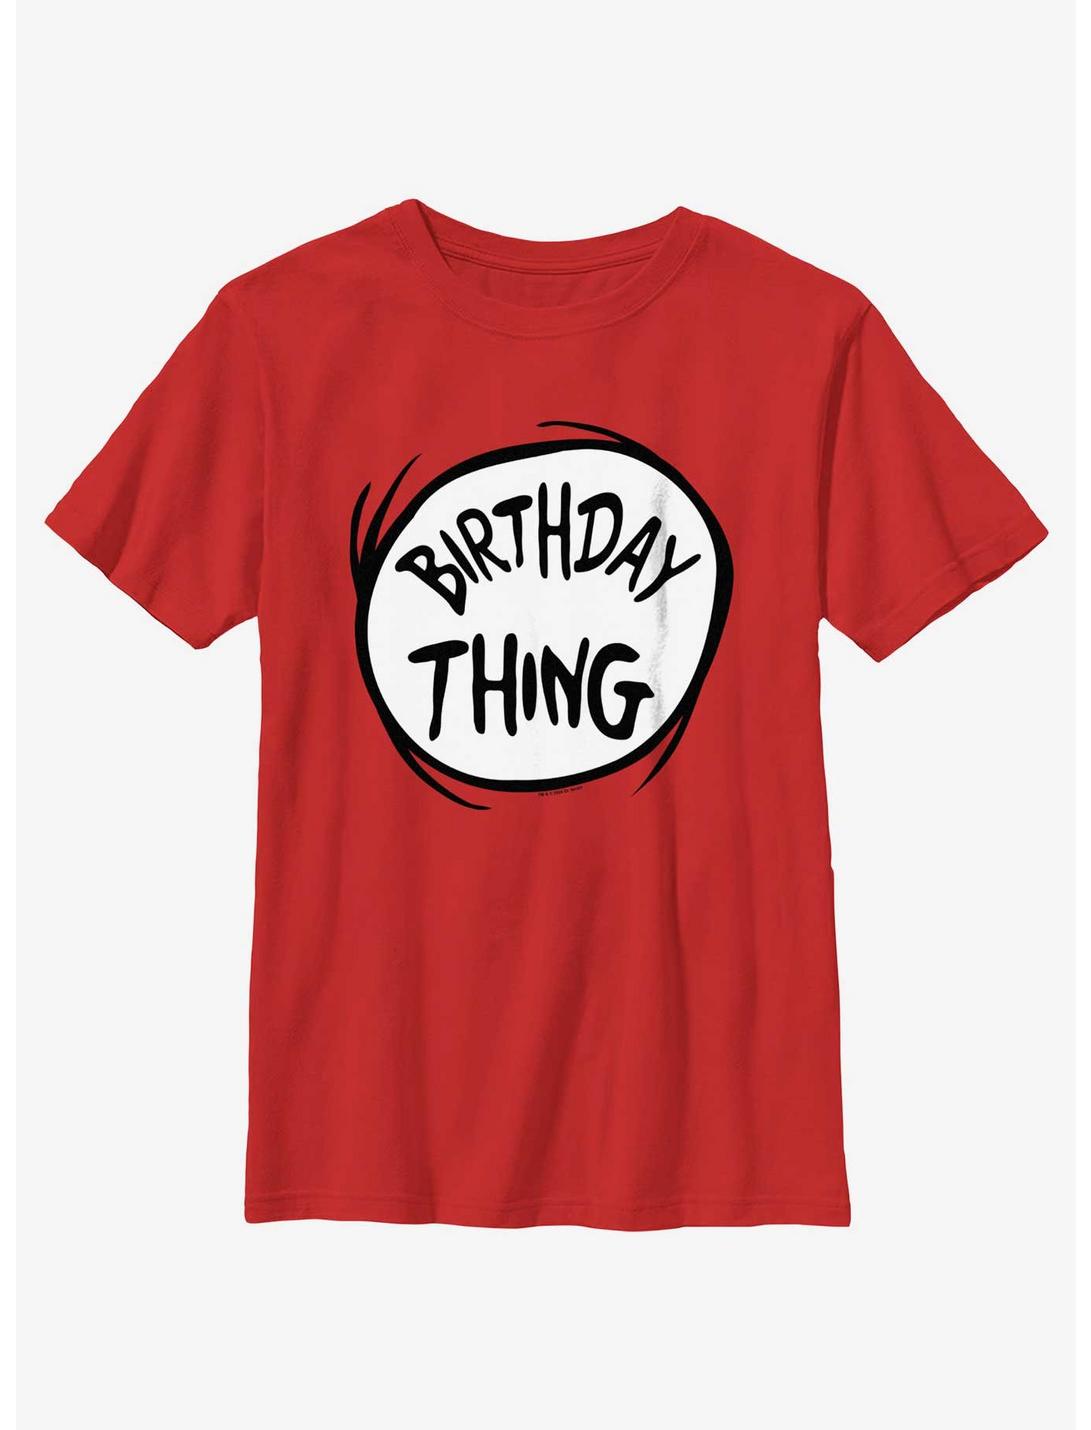 Dr. Seuss Birthday Thing Youth T-Shirt, RED, hi-res